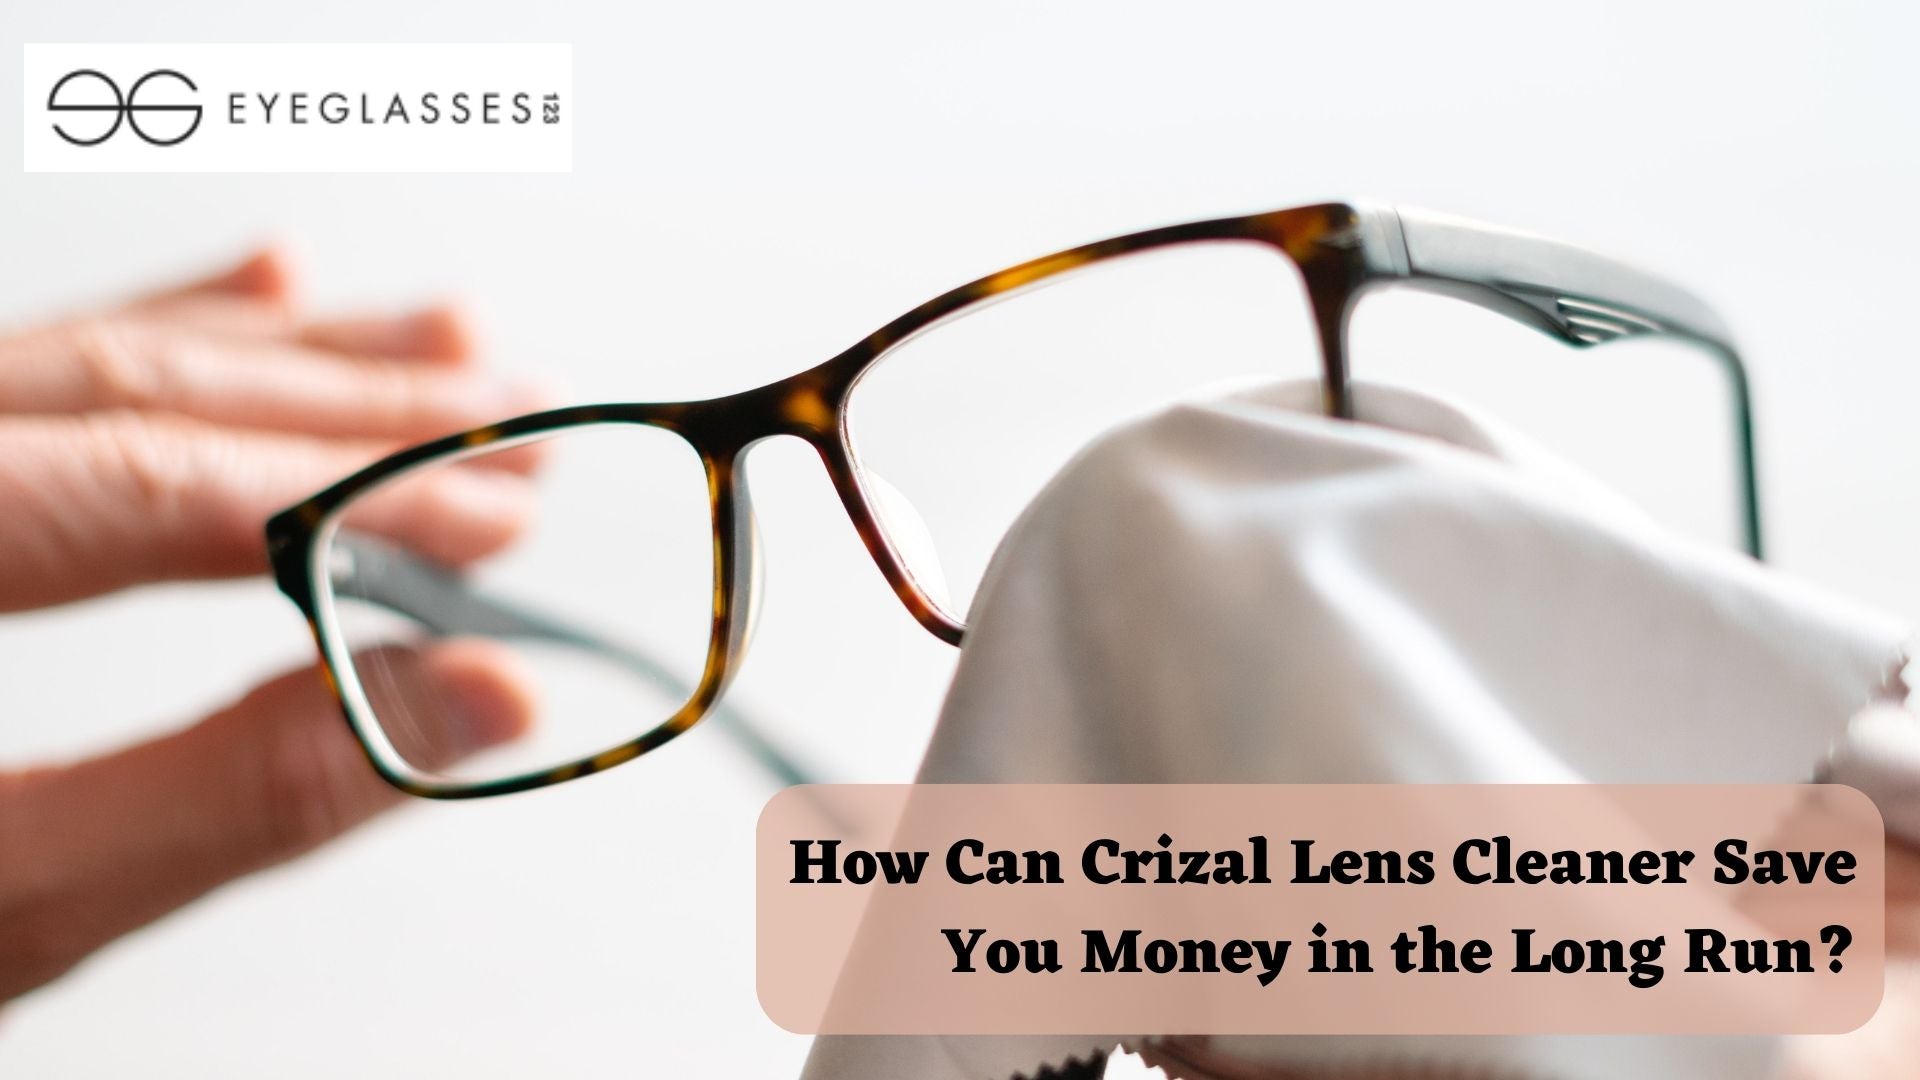 How Can Crizal Lens Cleaner Save You Money in the Long Run?